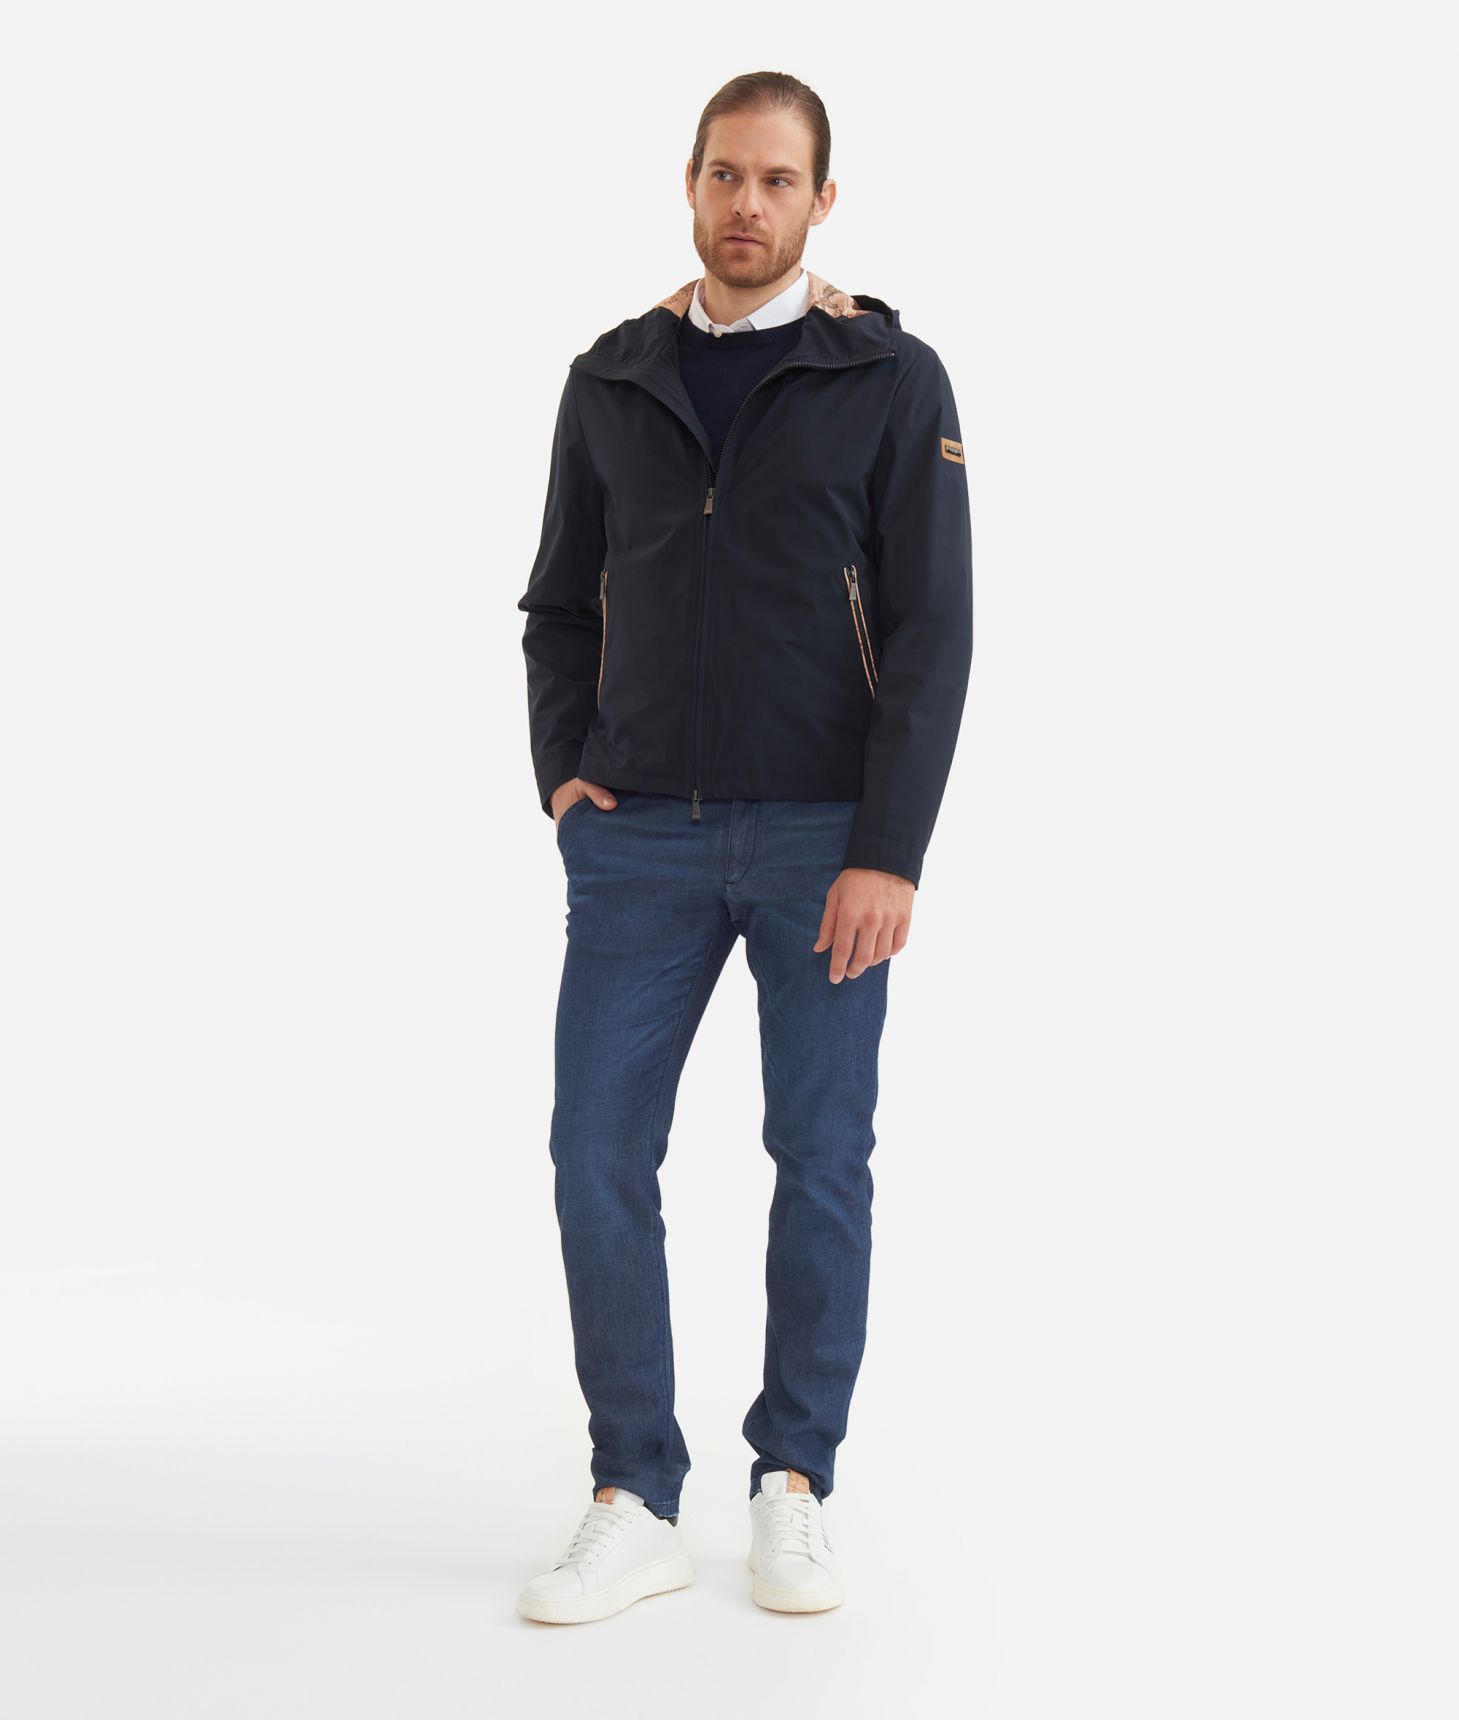 K-way with hood Navy Blue,front